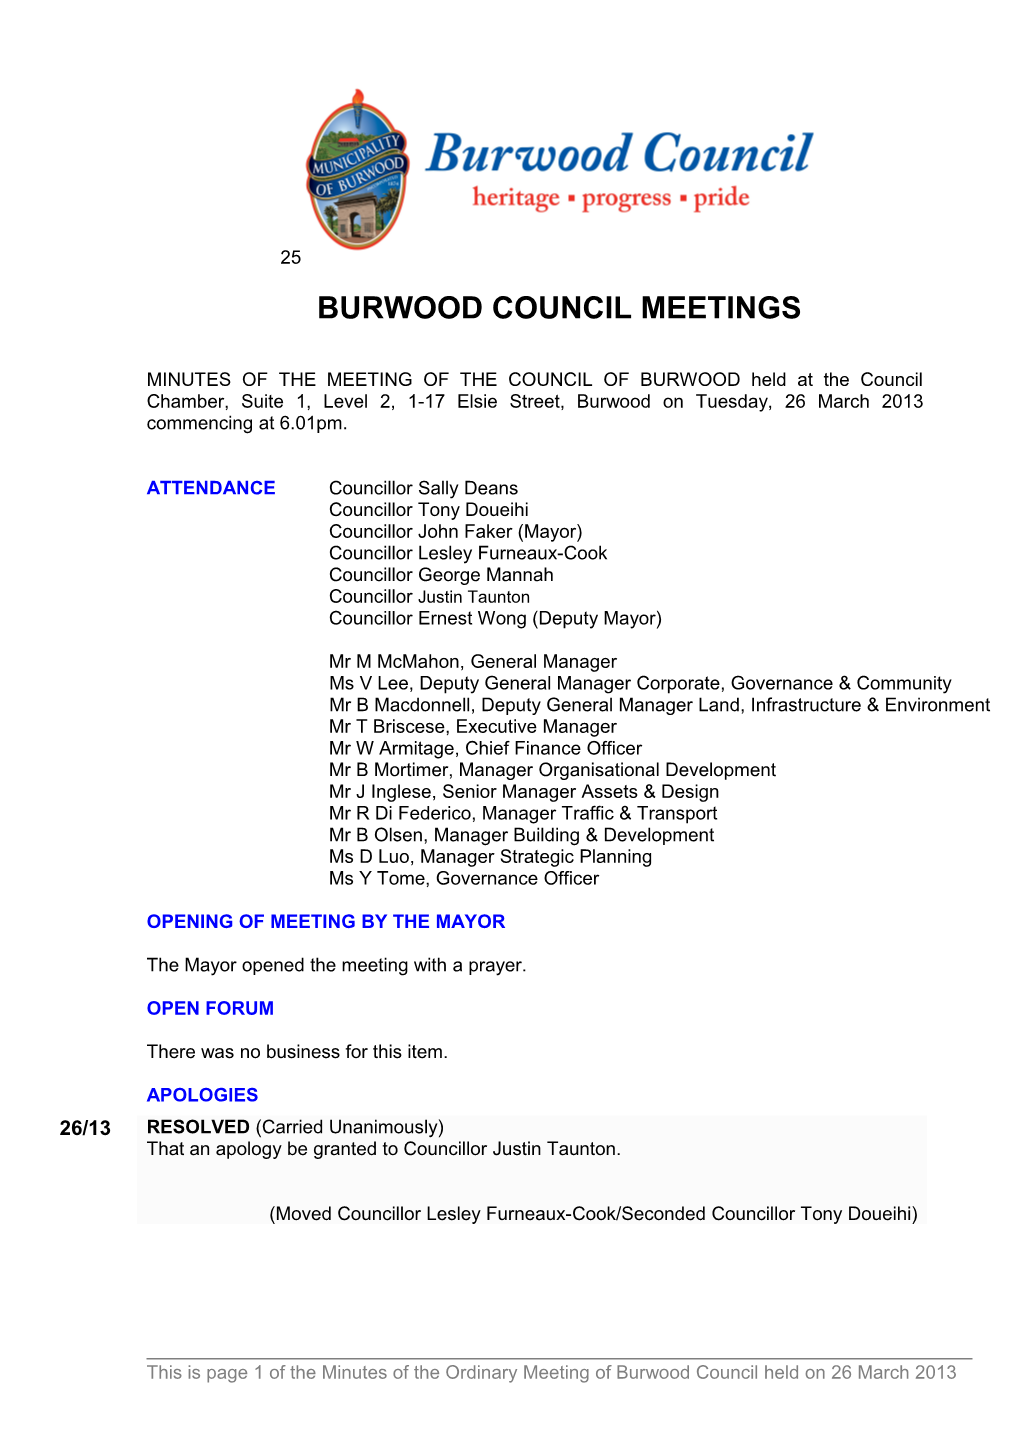 Pro-Forma Minutes of Burwood Council Meetings - 26 March 2013